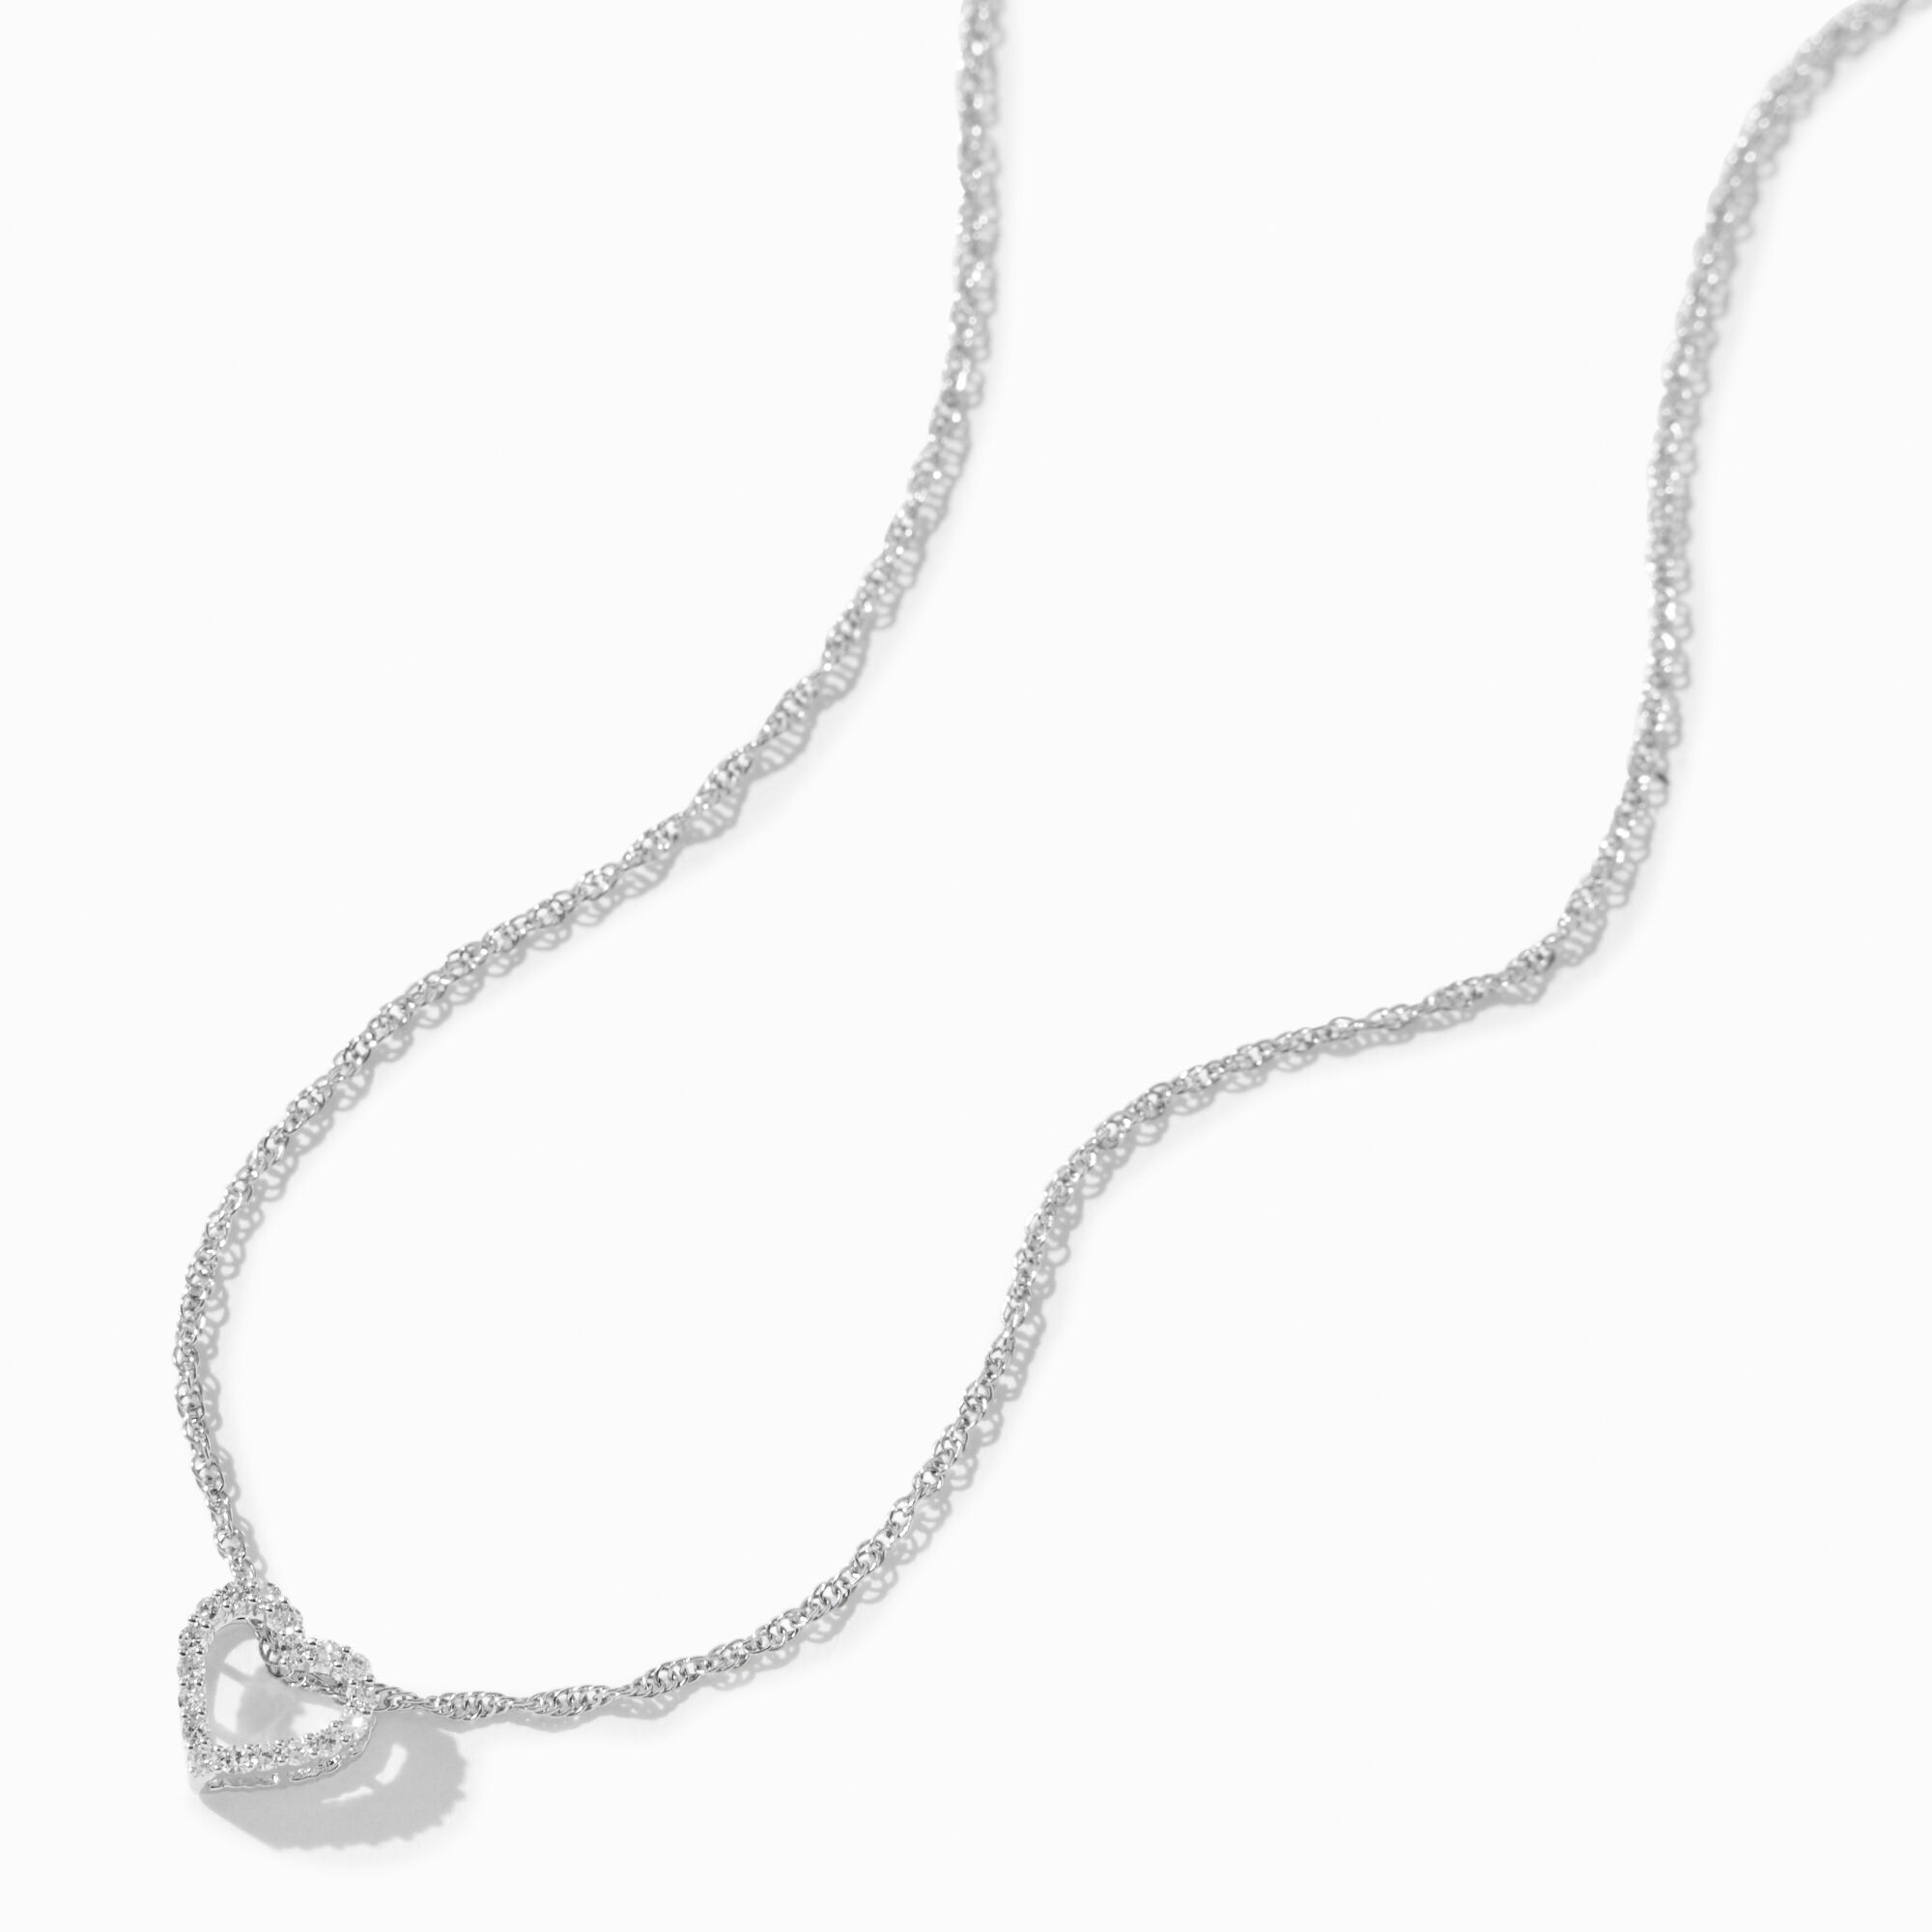 View C Luxe By Claires 110 Ct Tw Laboratory Grown Diamond Open Heart Pendant Necklace Silver information